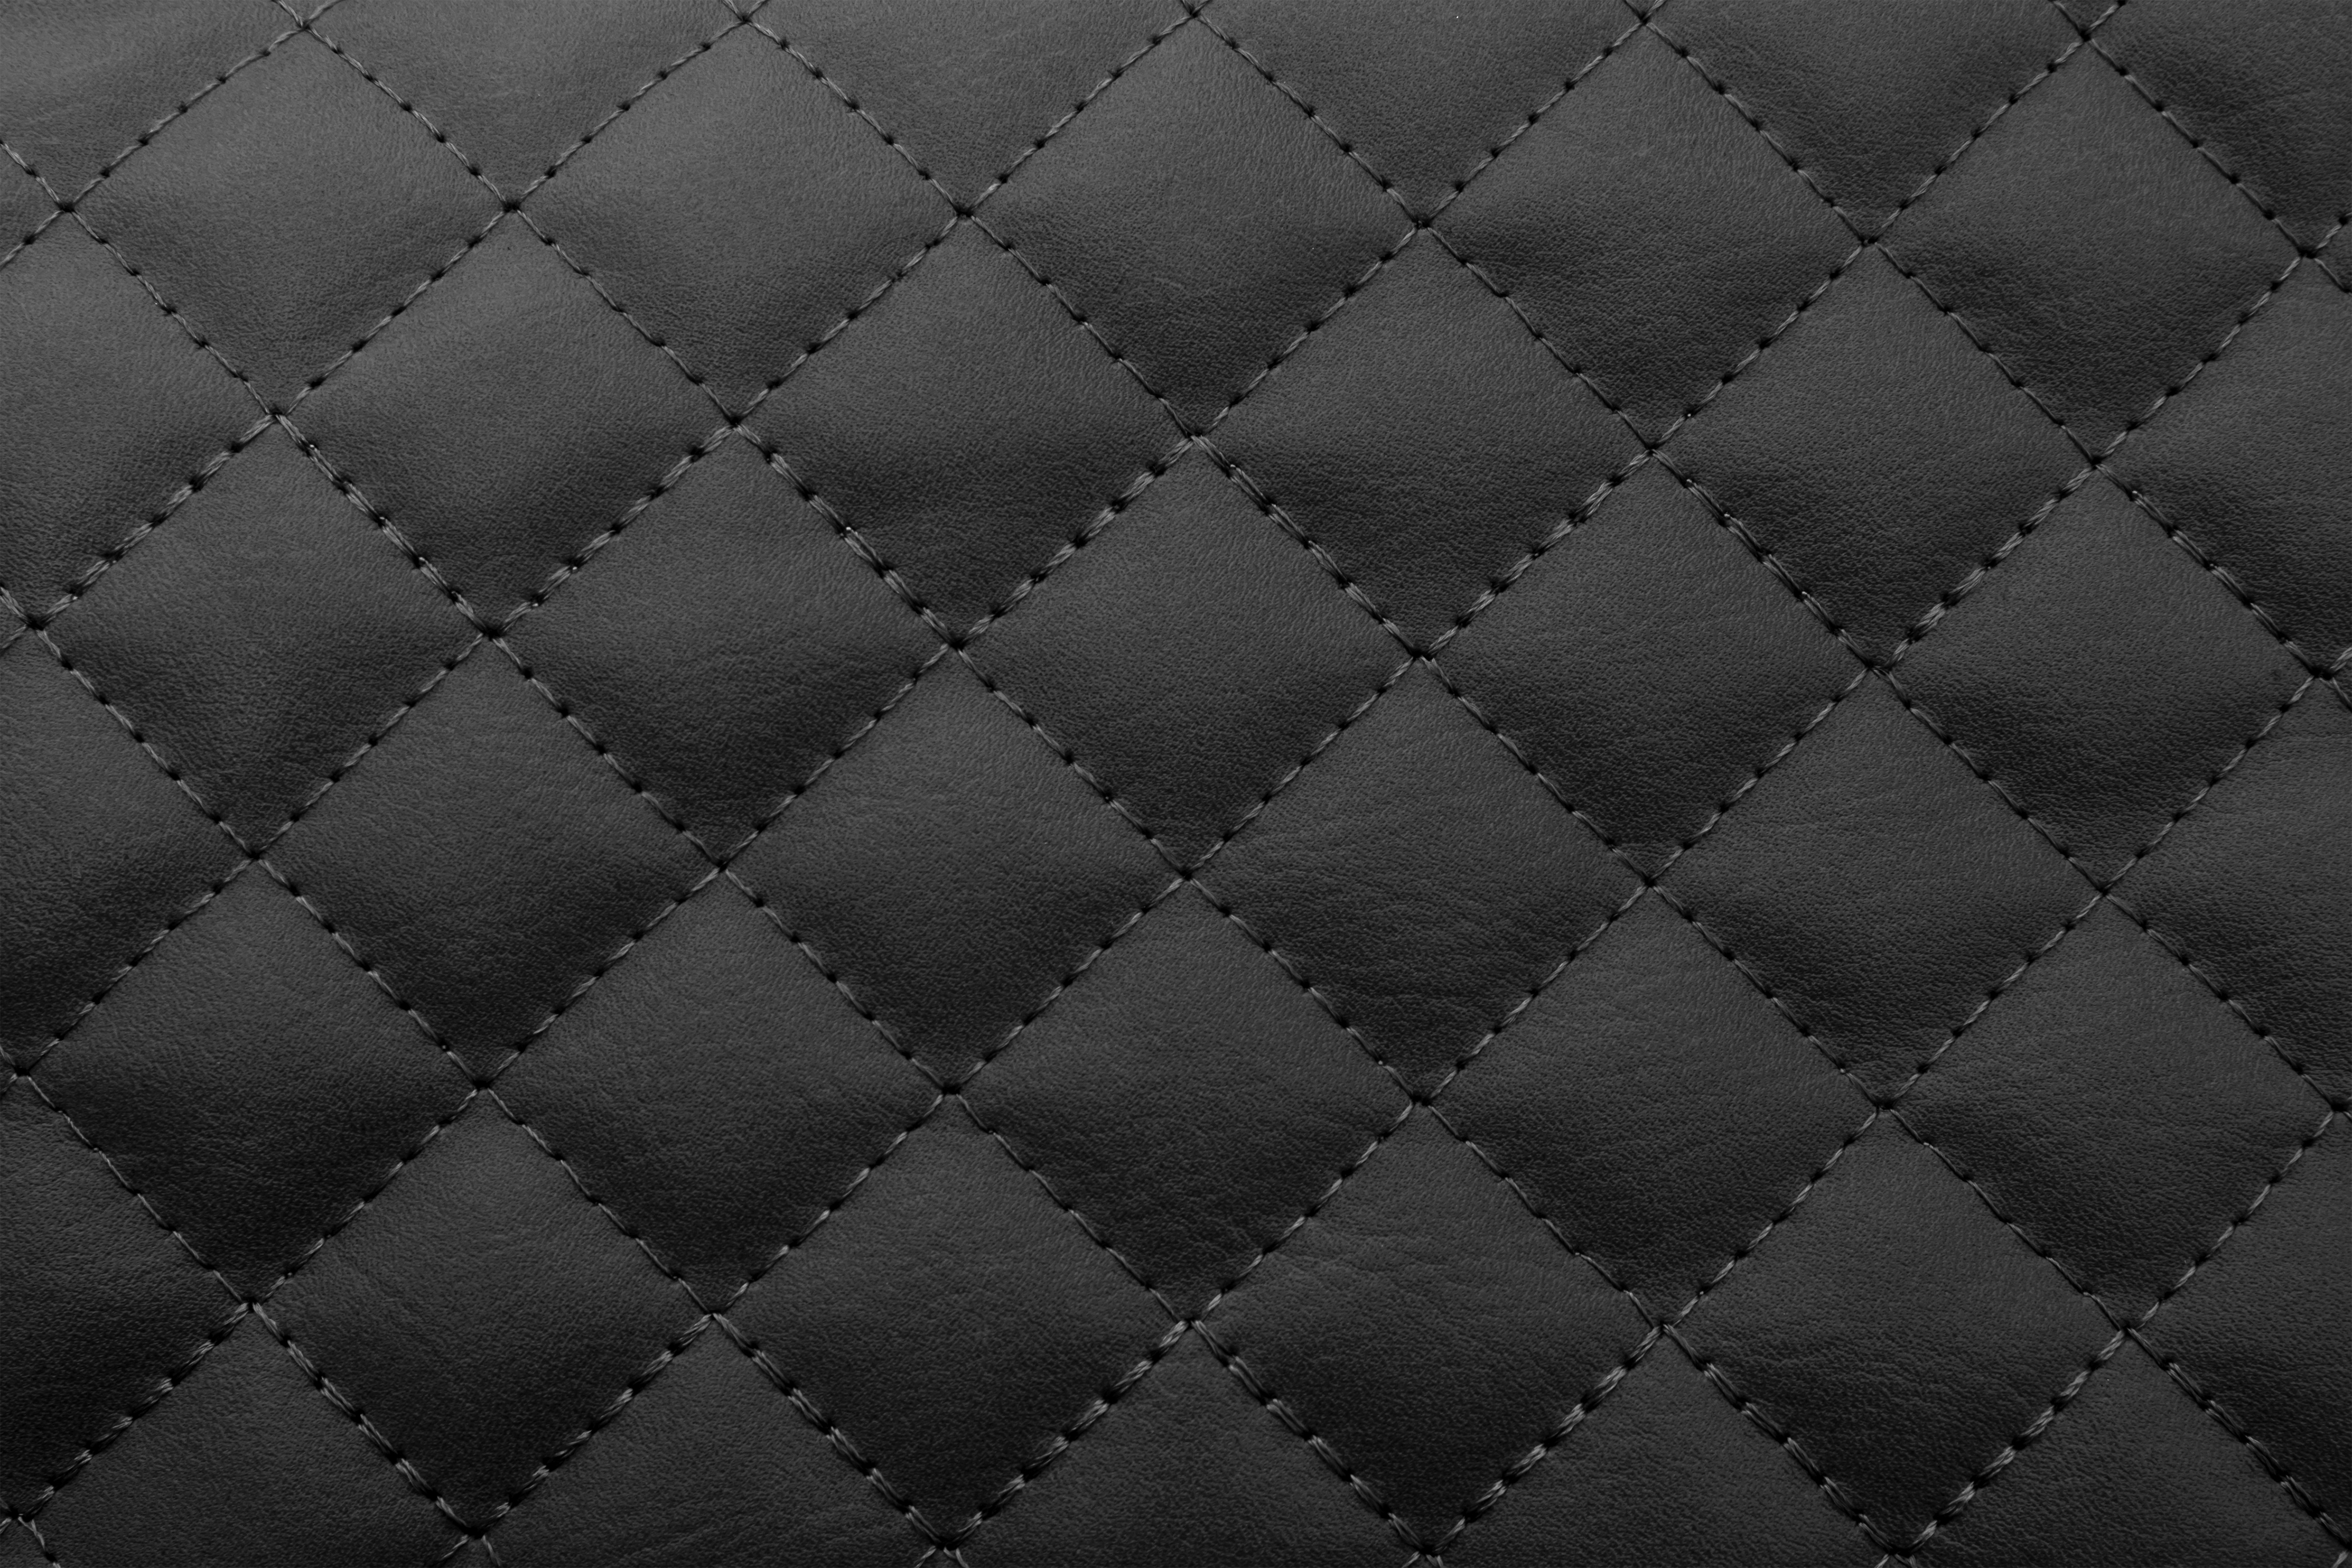 Leather In Black Background Gallery Yopriceville High Quality Images And Transparent Png Free Clipart